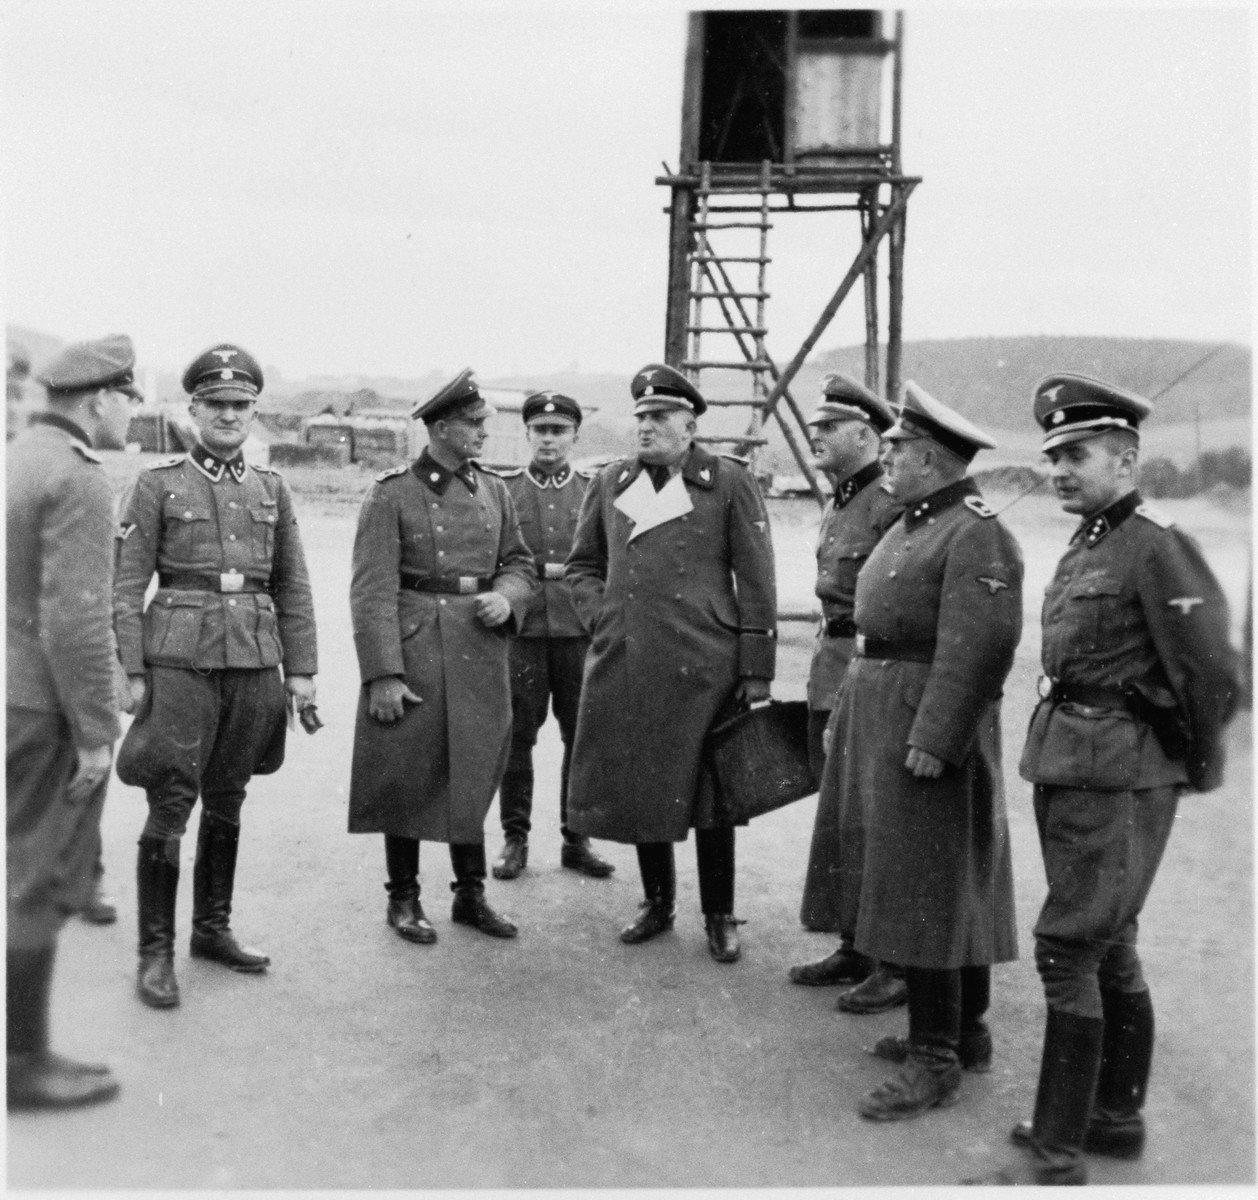 SS-Brigadefuhrer Richard Gluecks, the Inspector of Concentration Camps, stands carrying a briefcase with other SS men on an official visit to Gross-Rosen.

This was probably taken shortly before Gross-Rosen became an independent concentration camp.  Prior to May 1, 1944 it was a sub-camp of Sachsenhausen.